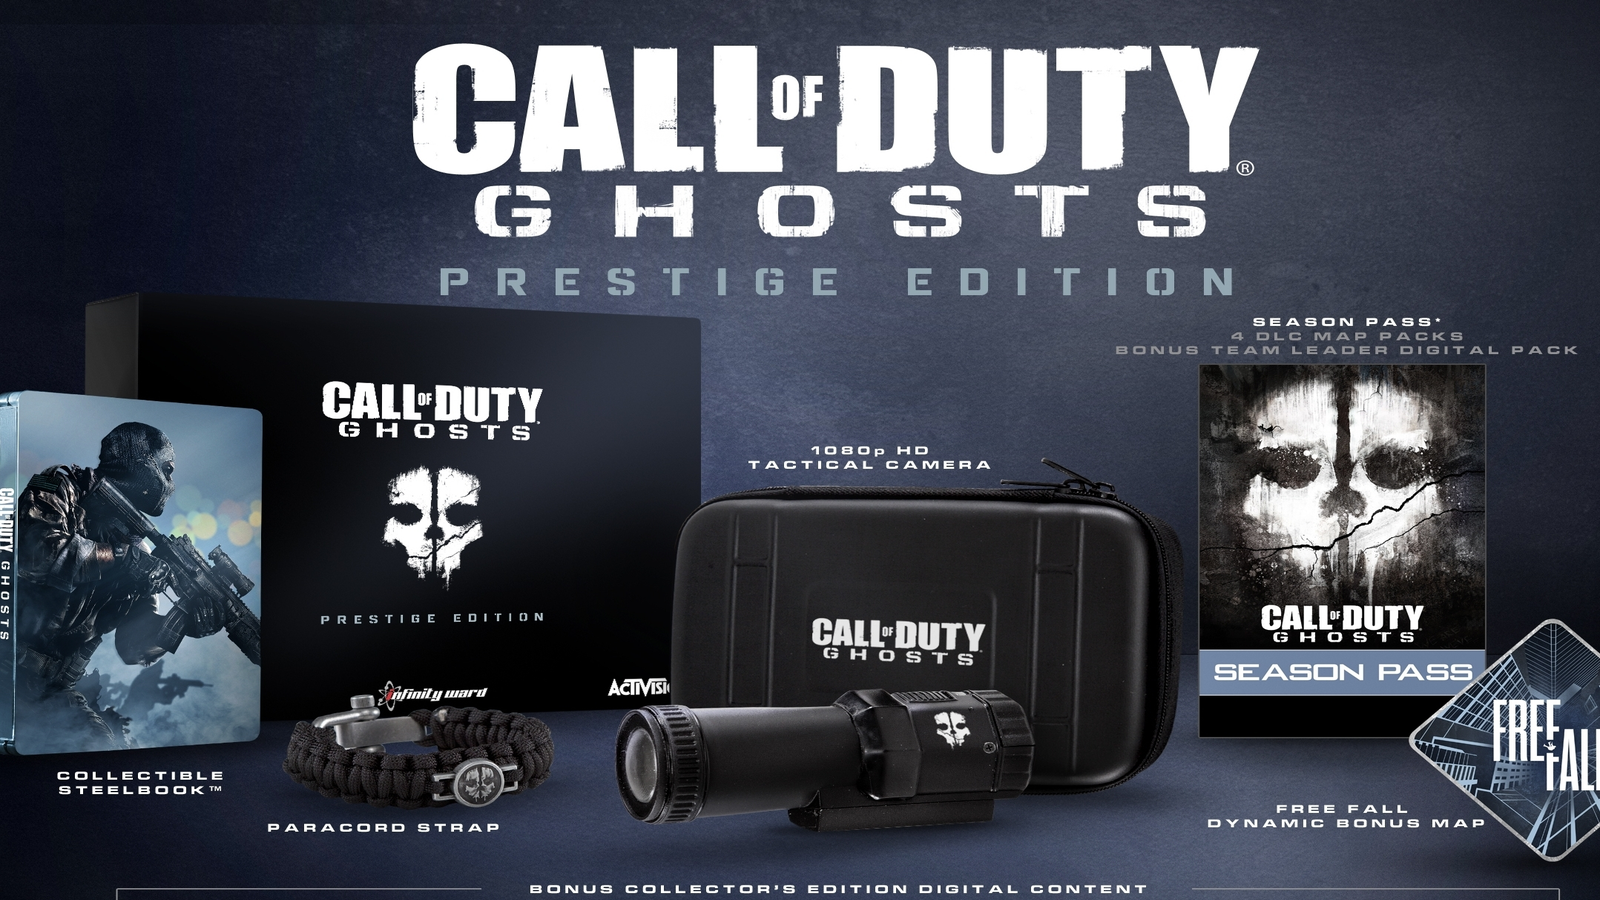 Free: Call of Duty Ghosts Limited Edition Prestige 1080p HD Tactical Camera  & Case. - Other Video Game & Console Items -  Auctions for Free  Stuff